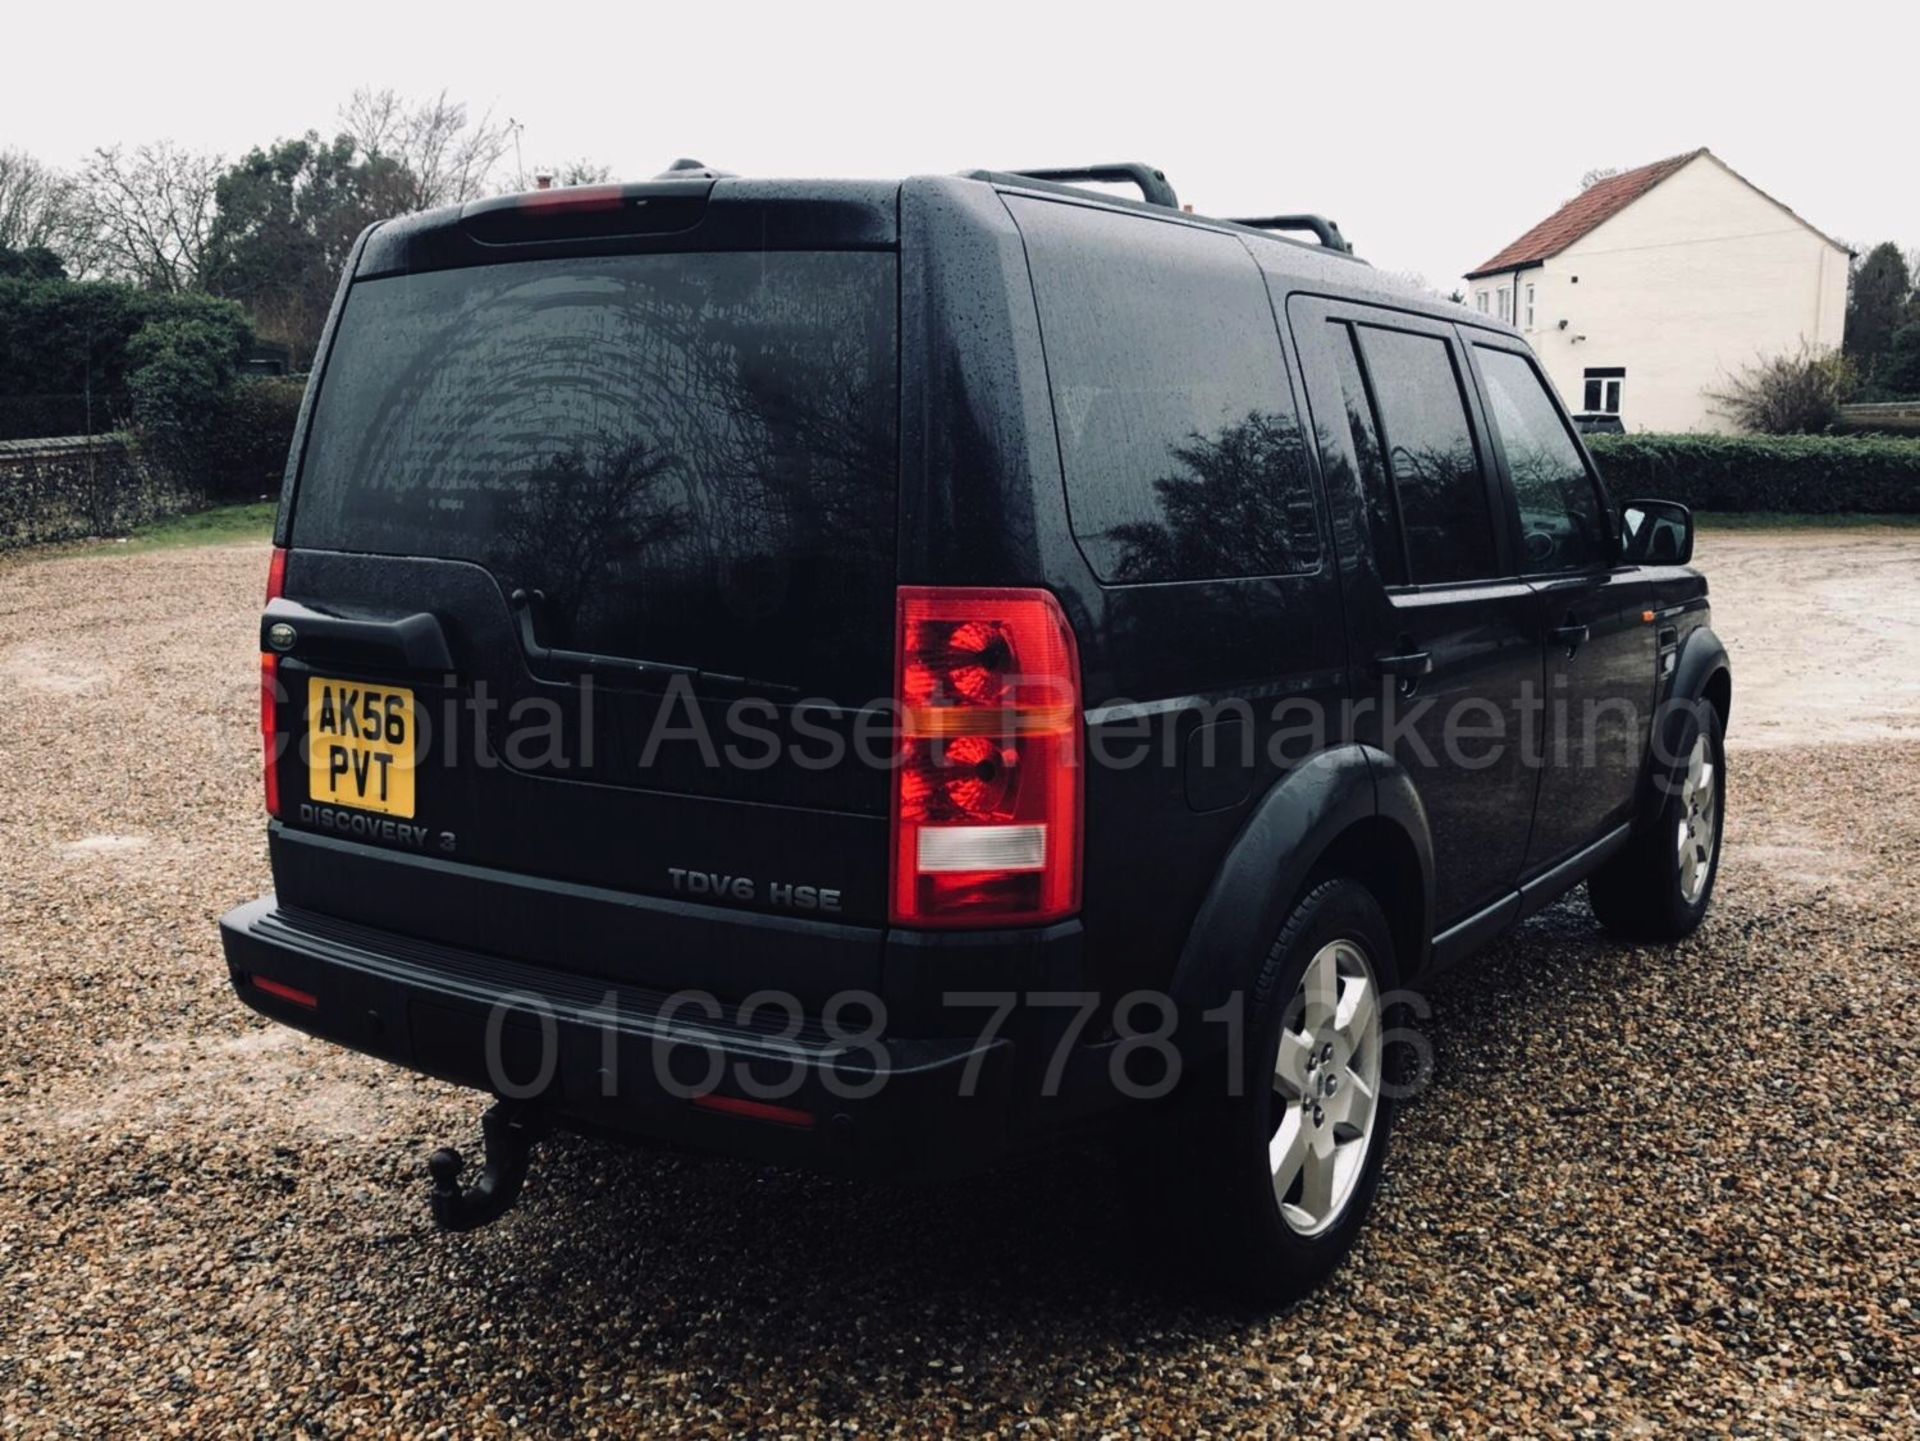 (On Sale) LAND ROVER DISCOVERY 3 'HSE' (2007 MODEL) 'TDV6 - AUTO - LEATHER - SAT NAV' *HUGE SPEC* - Image 12 of 51